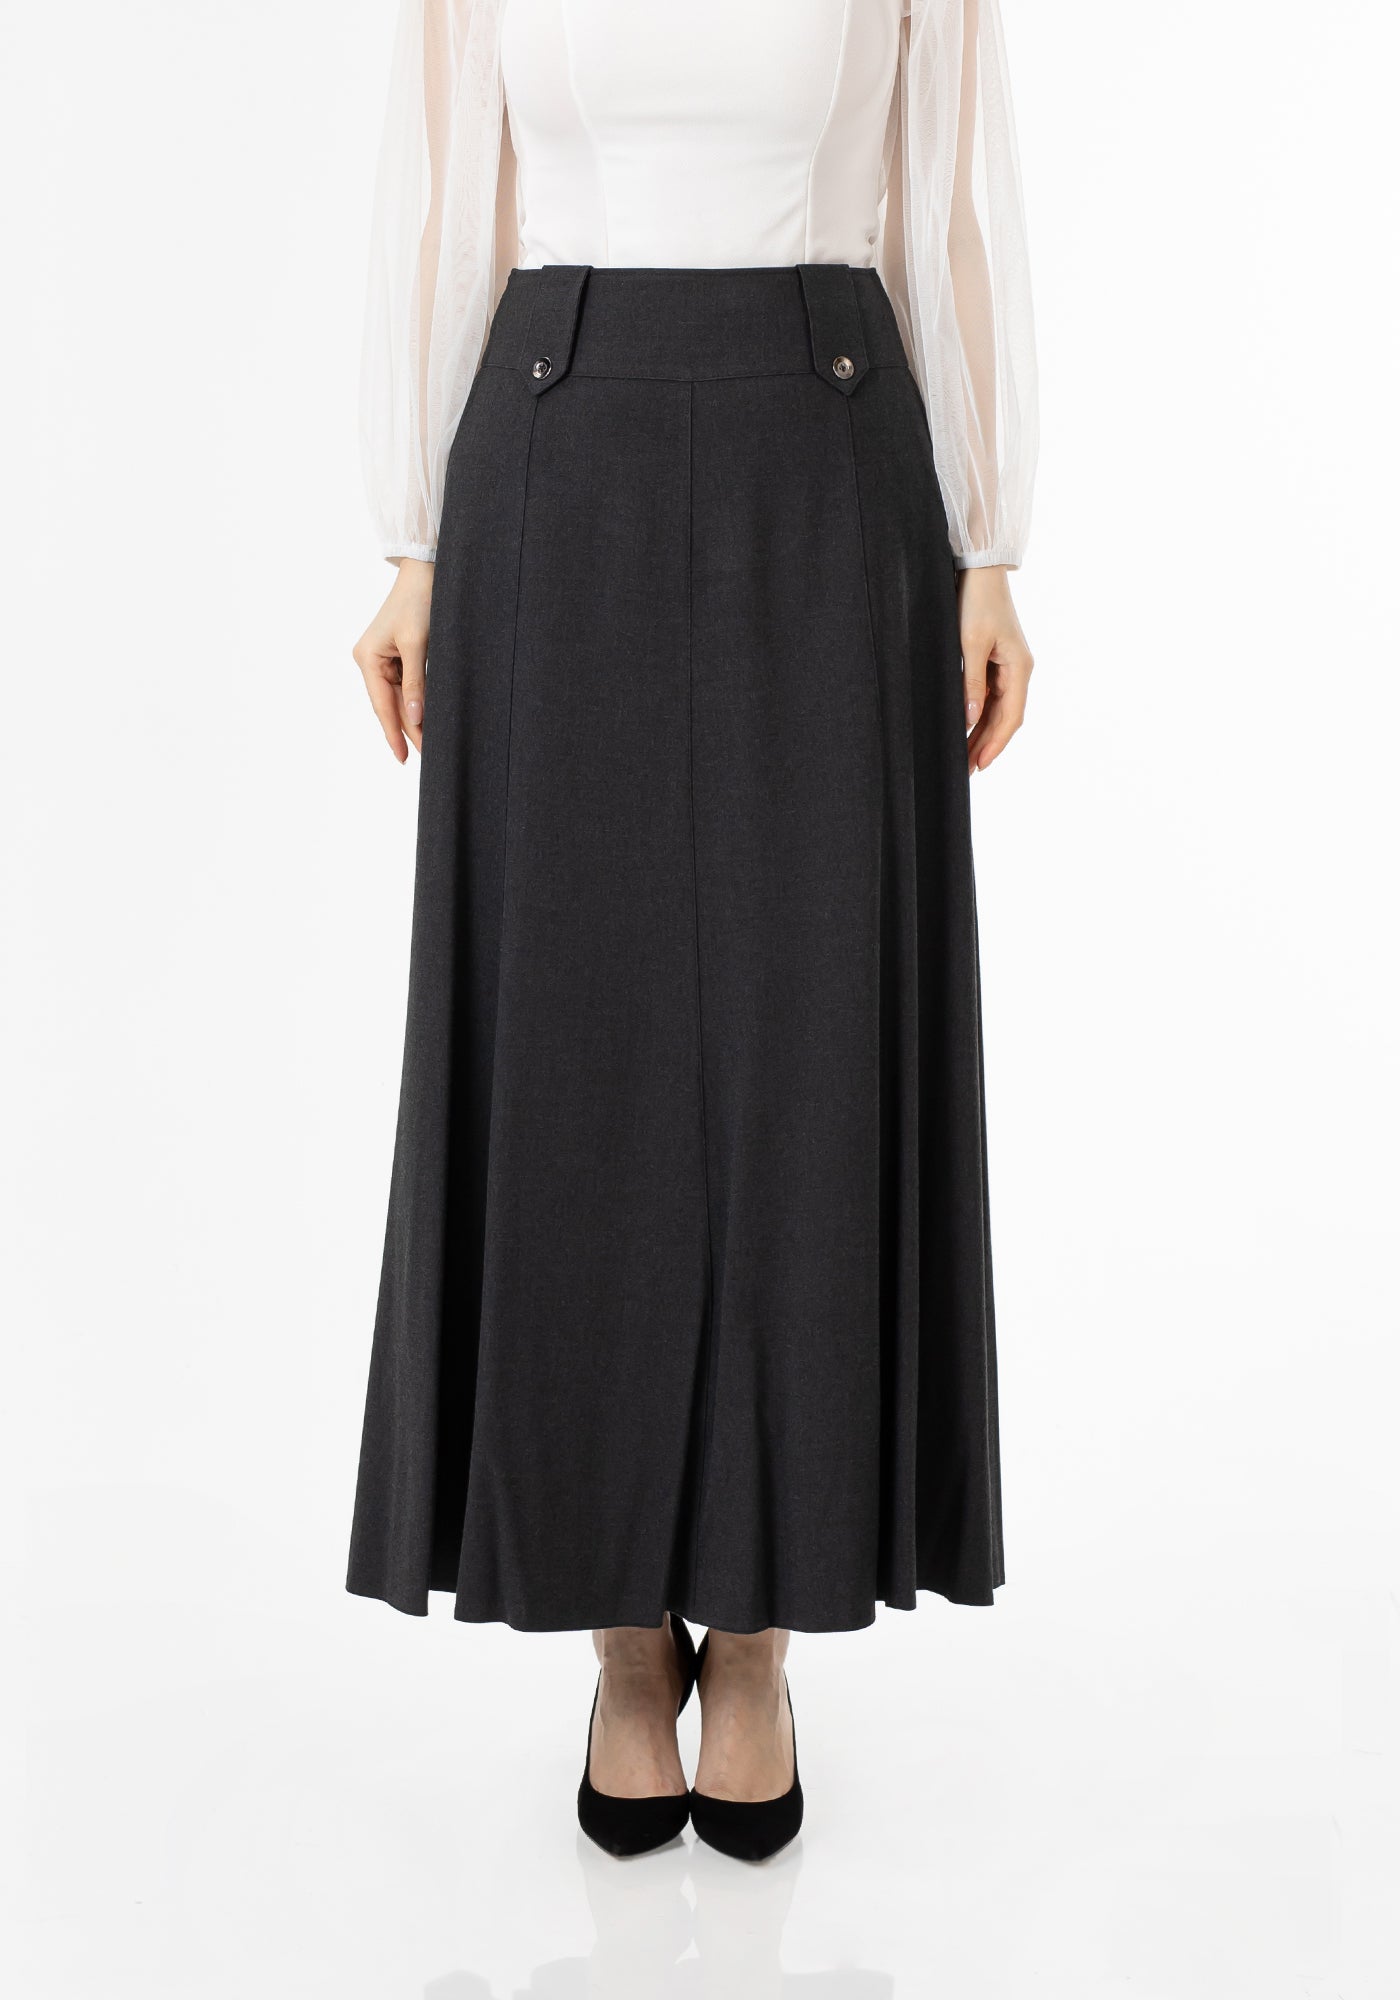 Stylish Charcoal Maxi Flared Skirt with Unique Gores and Comfortable Fit G-Line